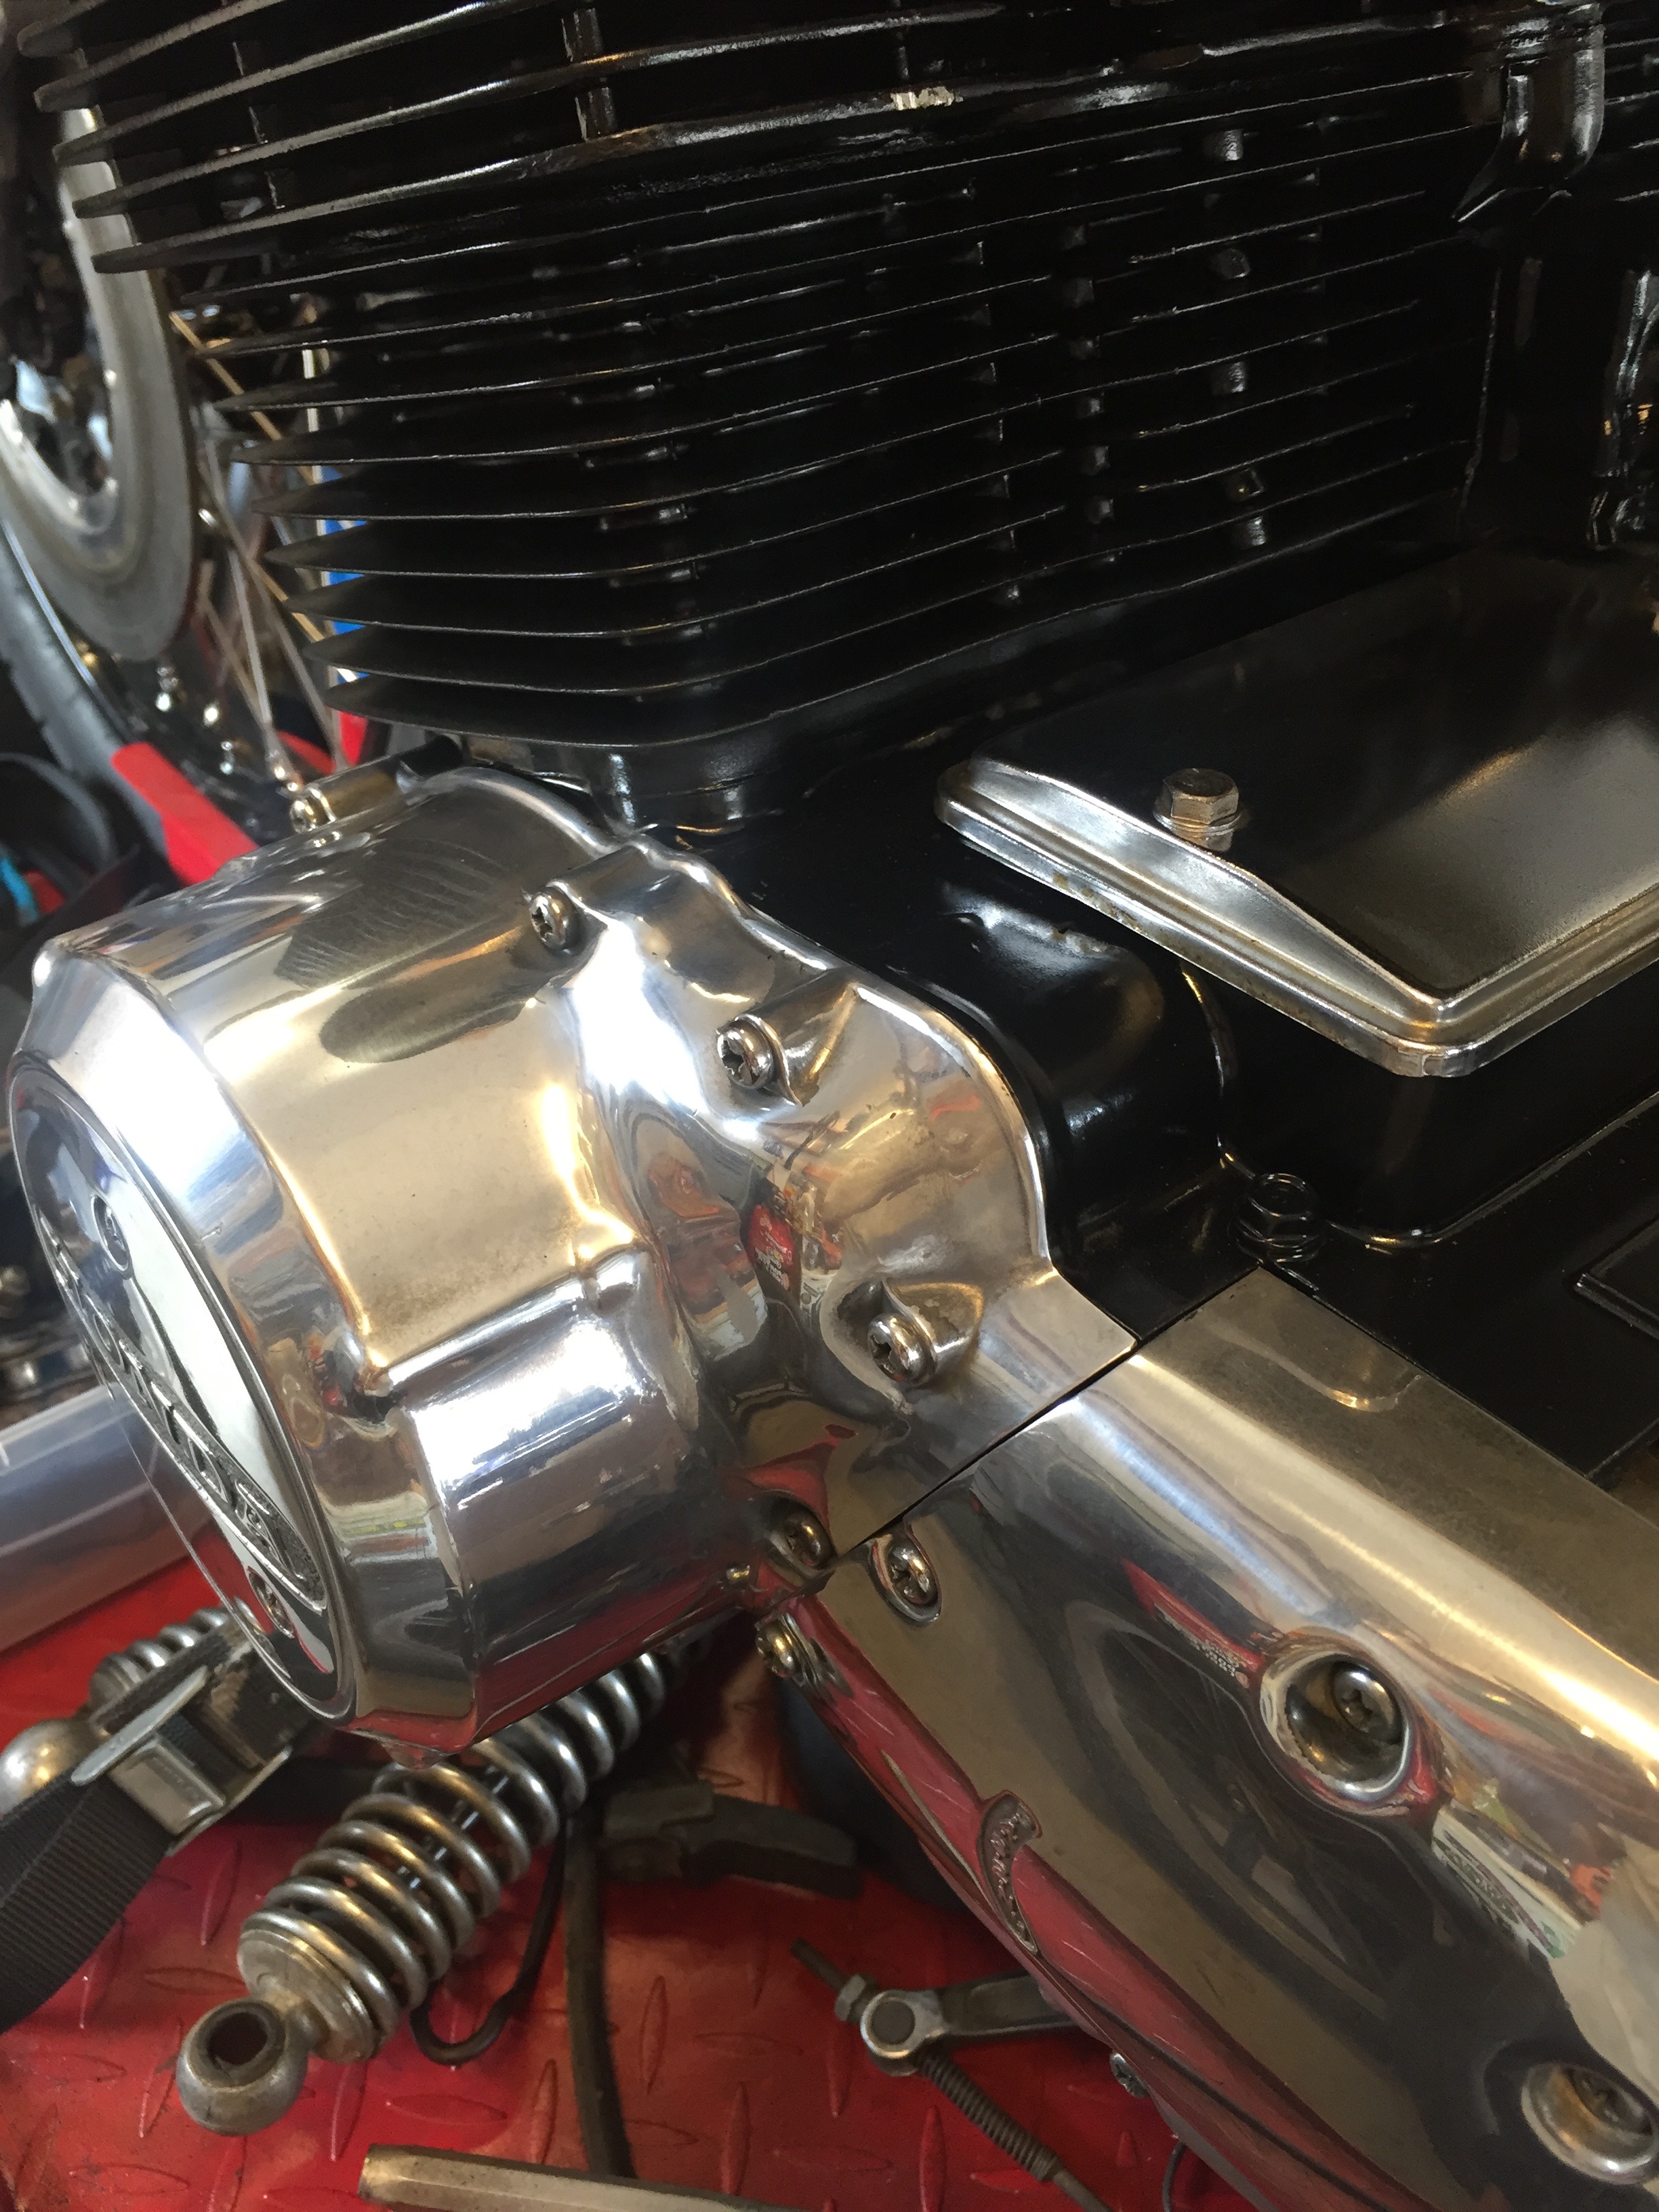  More polishing on the engine casings. &nbsp;Polished aluminum is so pretty. &nbsp;It screams vintage while looking brand new. &nbsp; 